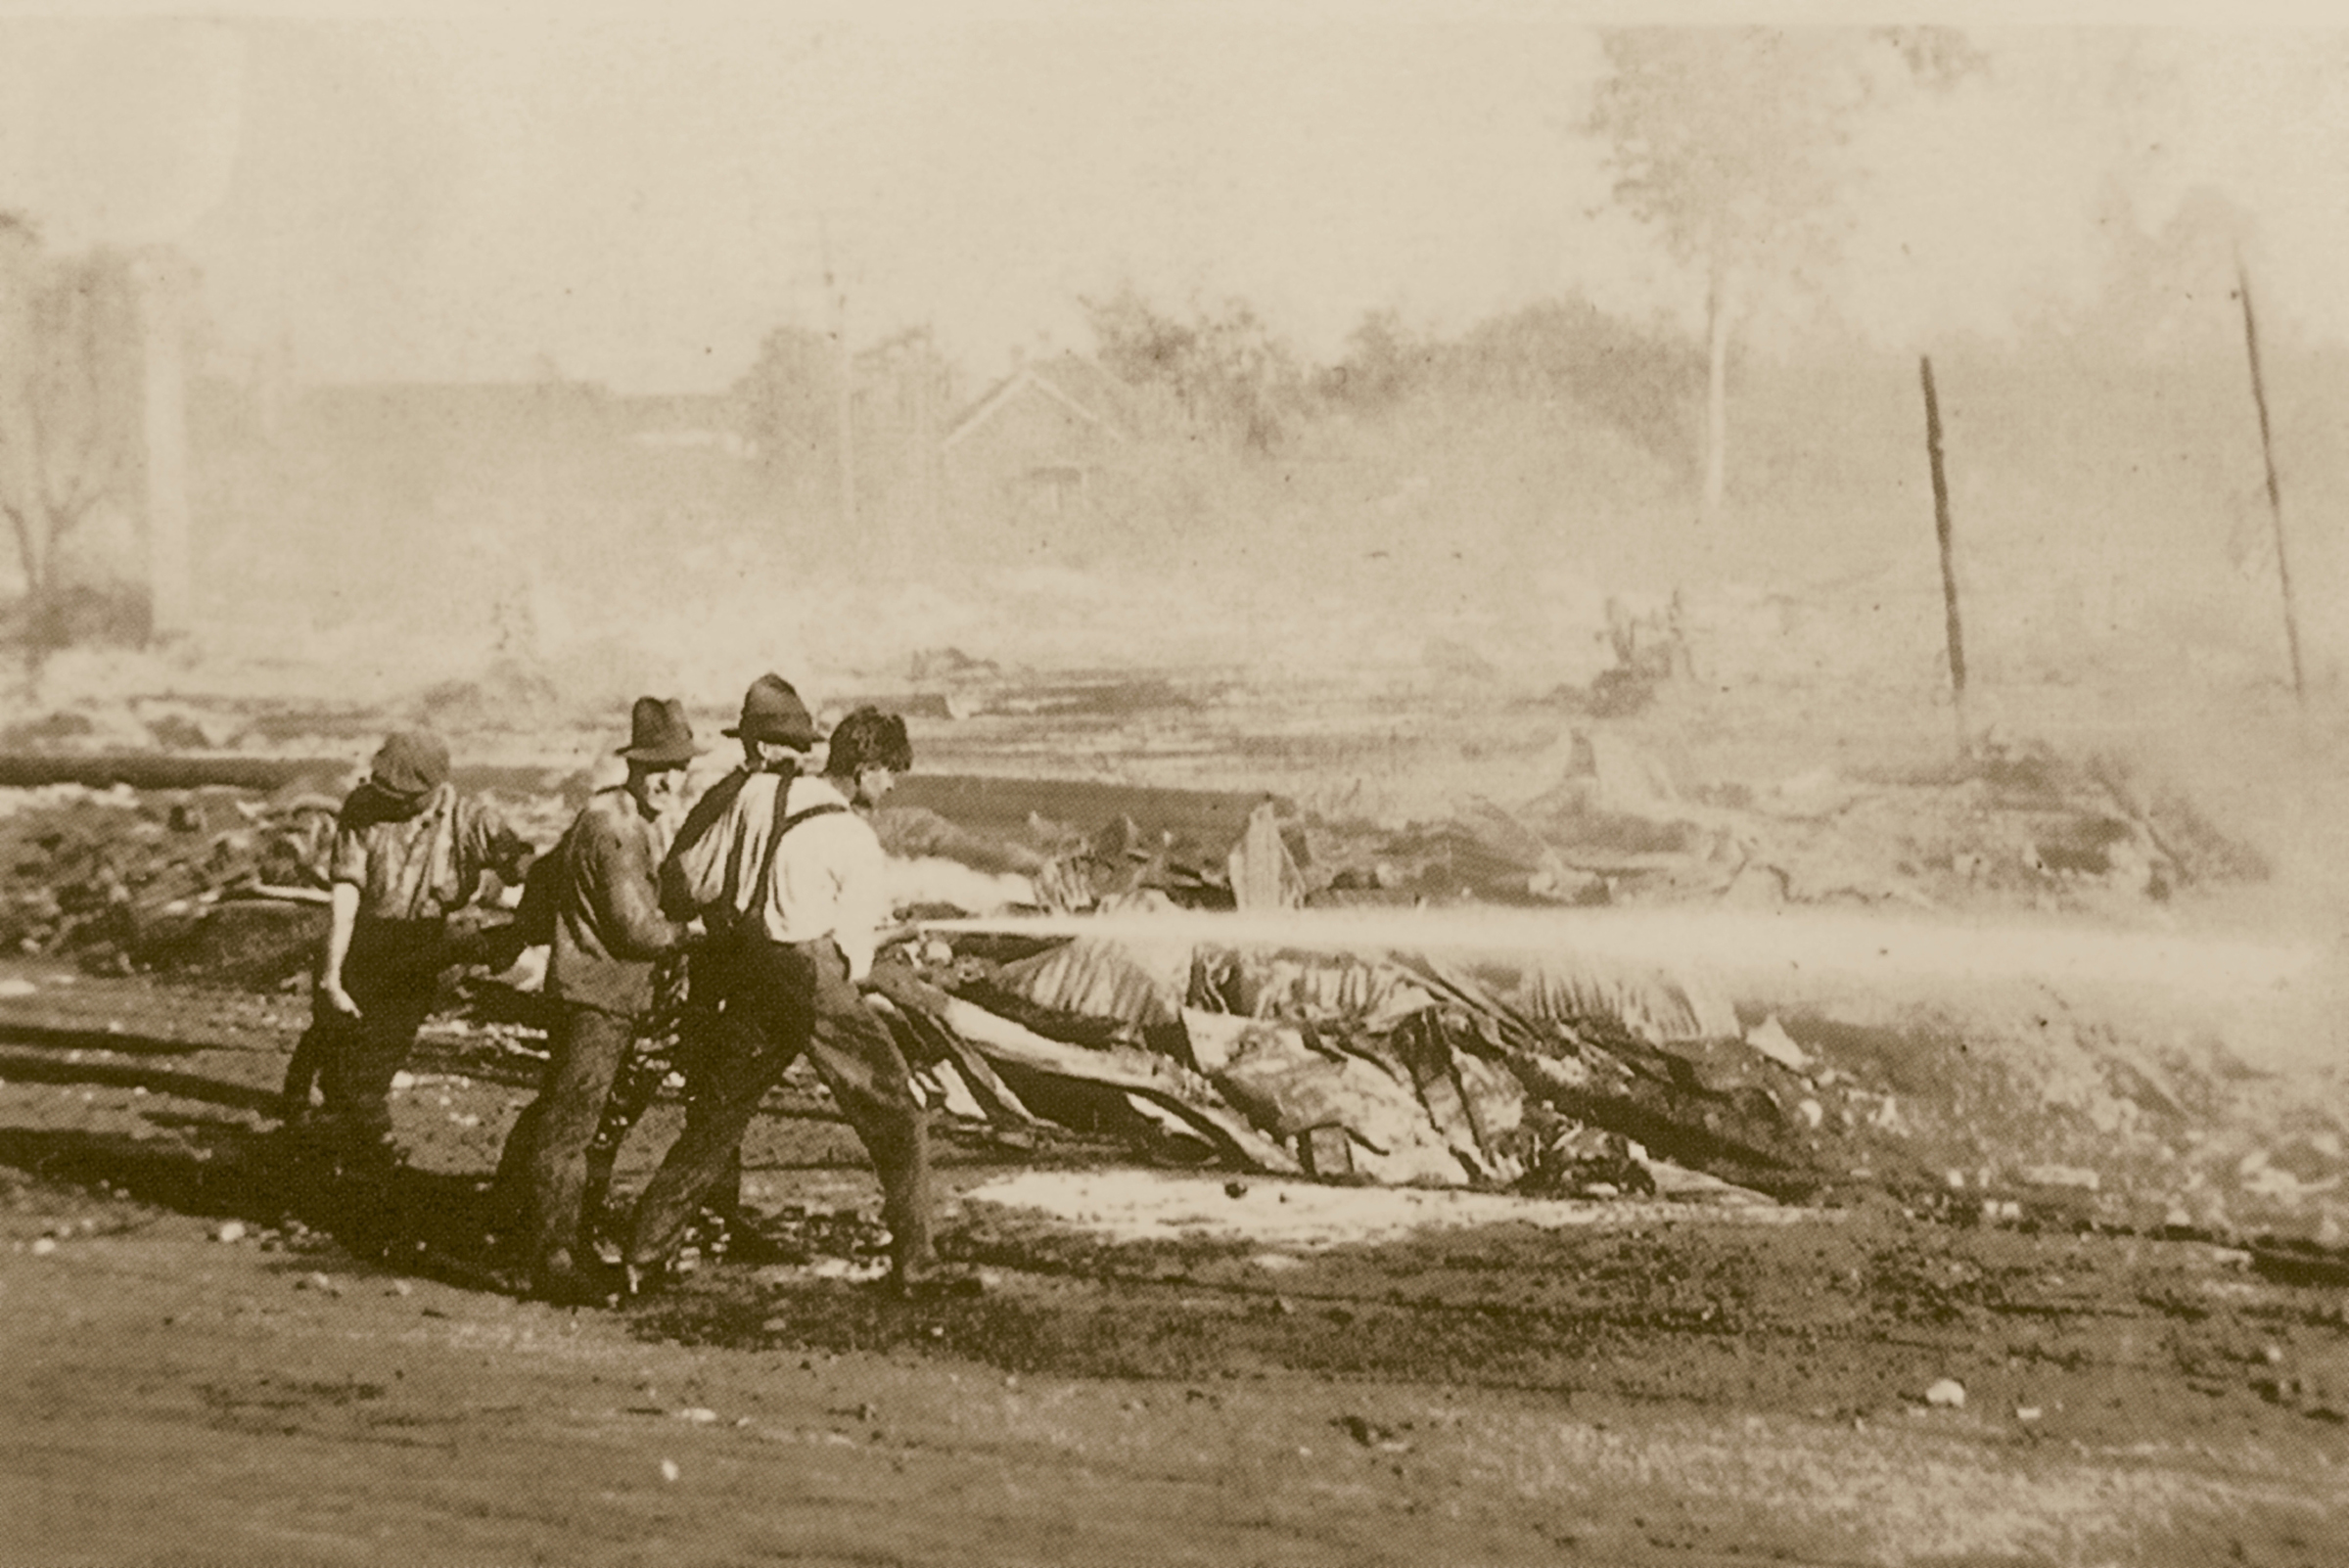 Four men surrounded by rubble directing a fire hose